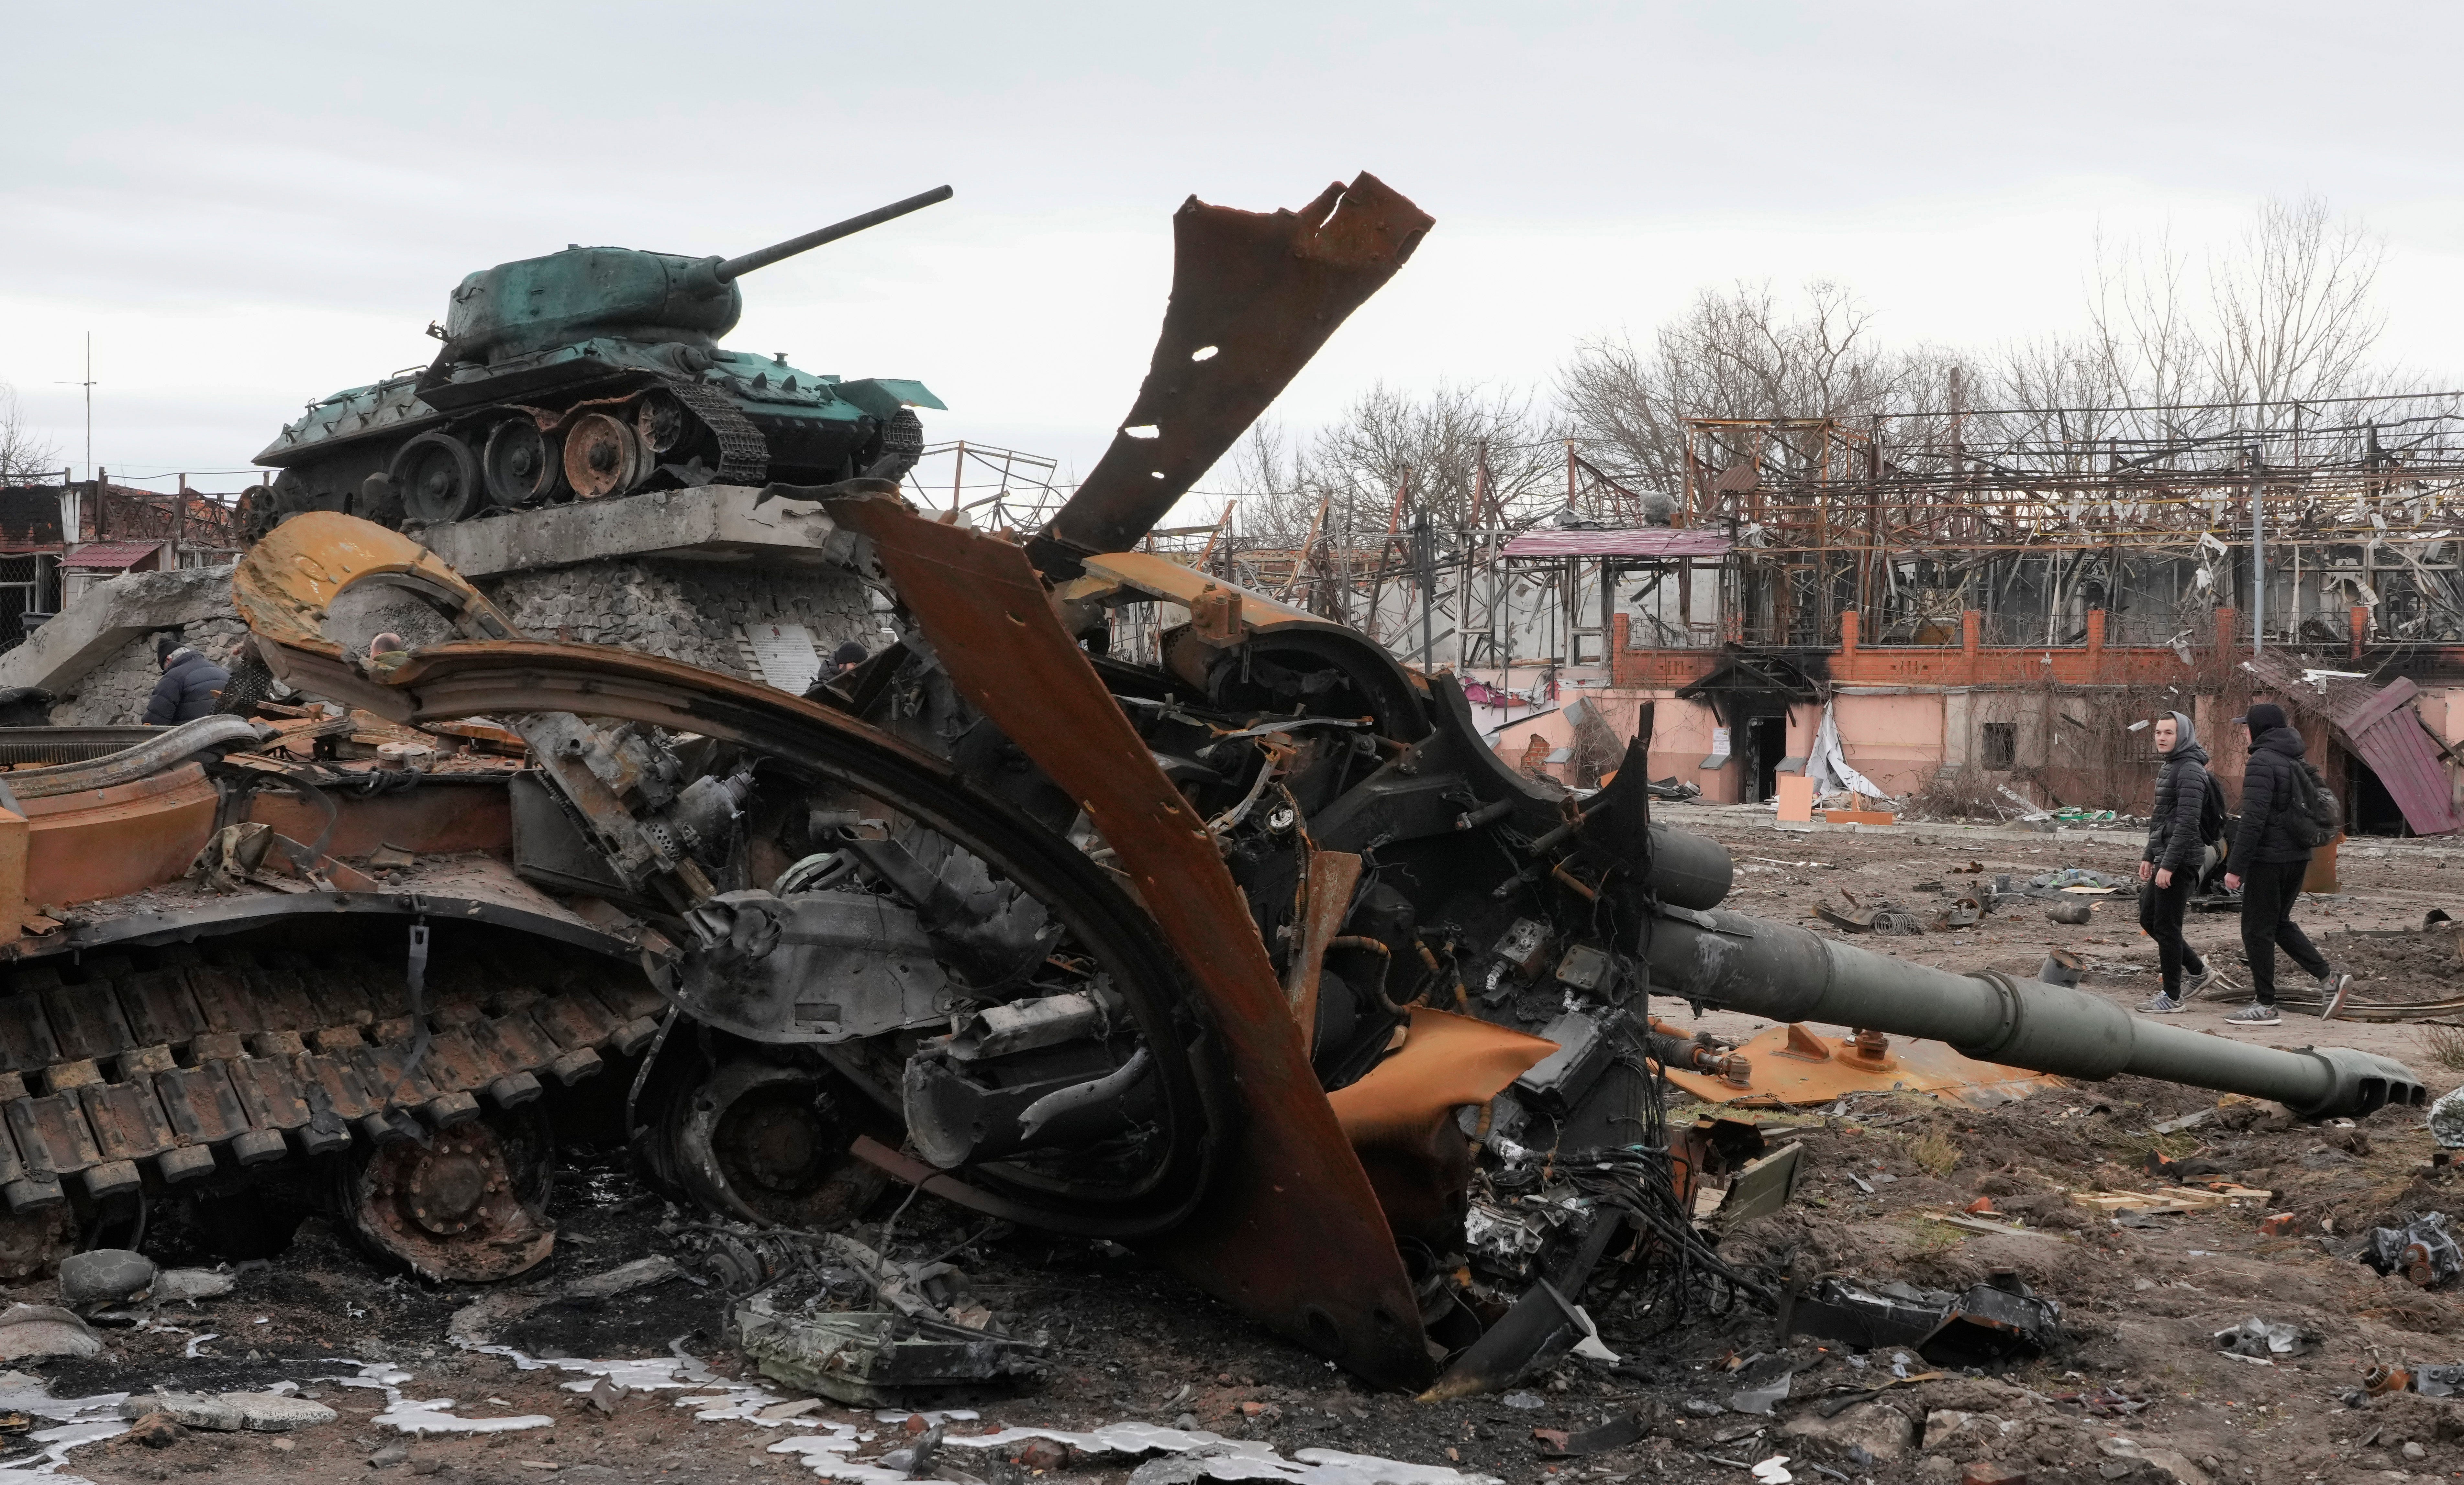 Local residents pass by a damaged Russian tank in a town east of Kyiv